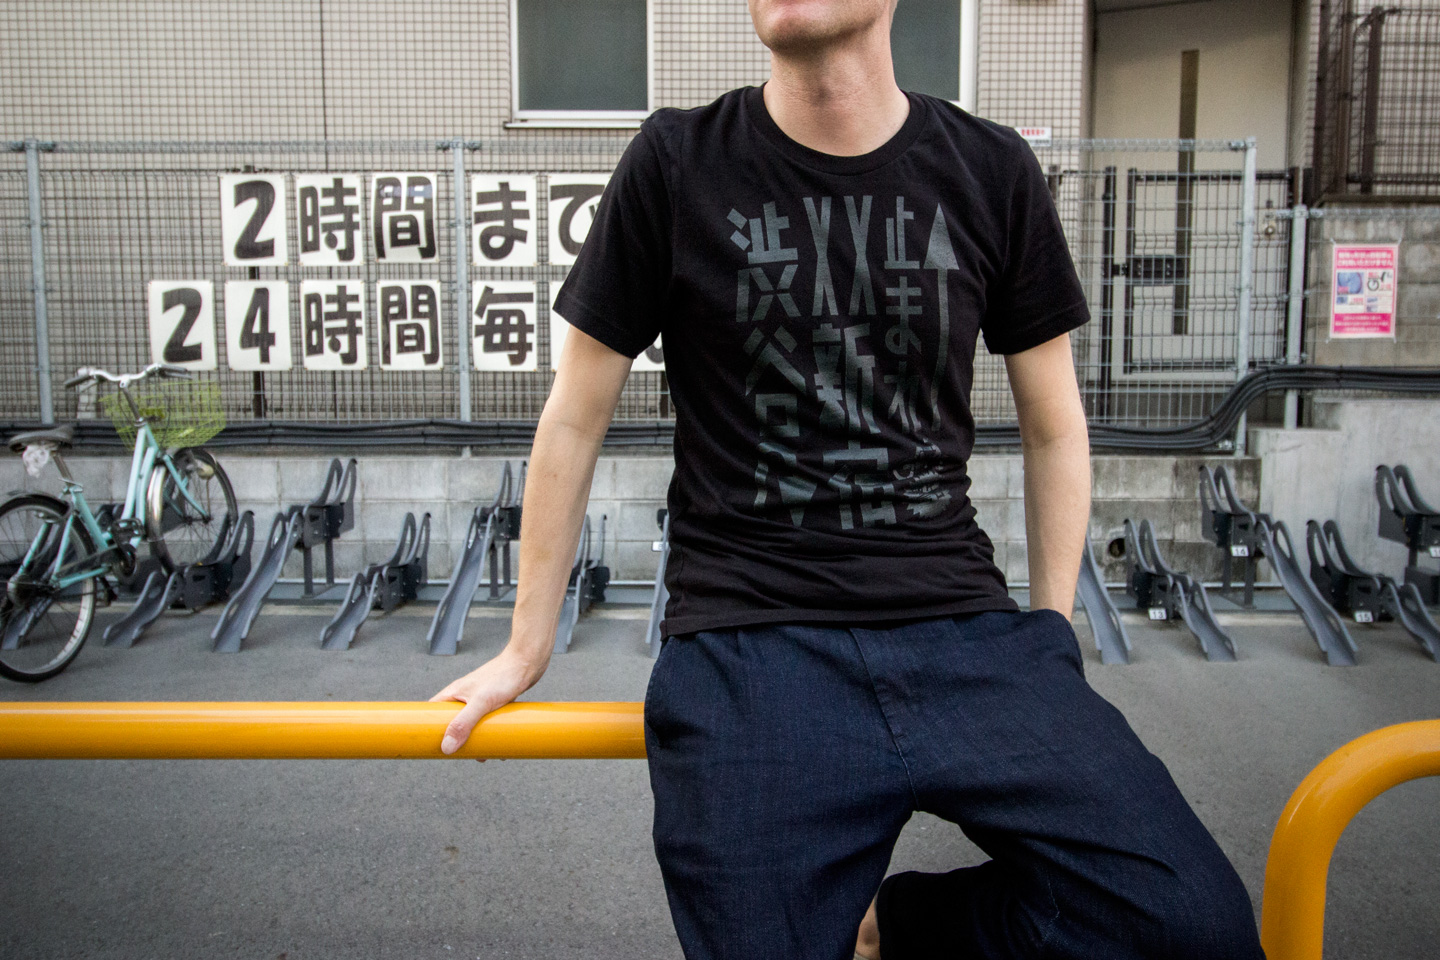 Tokyo Signs - Products inspired by the streets of Tokyo - Tokyo Roadmark Tshirt (black on black)